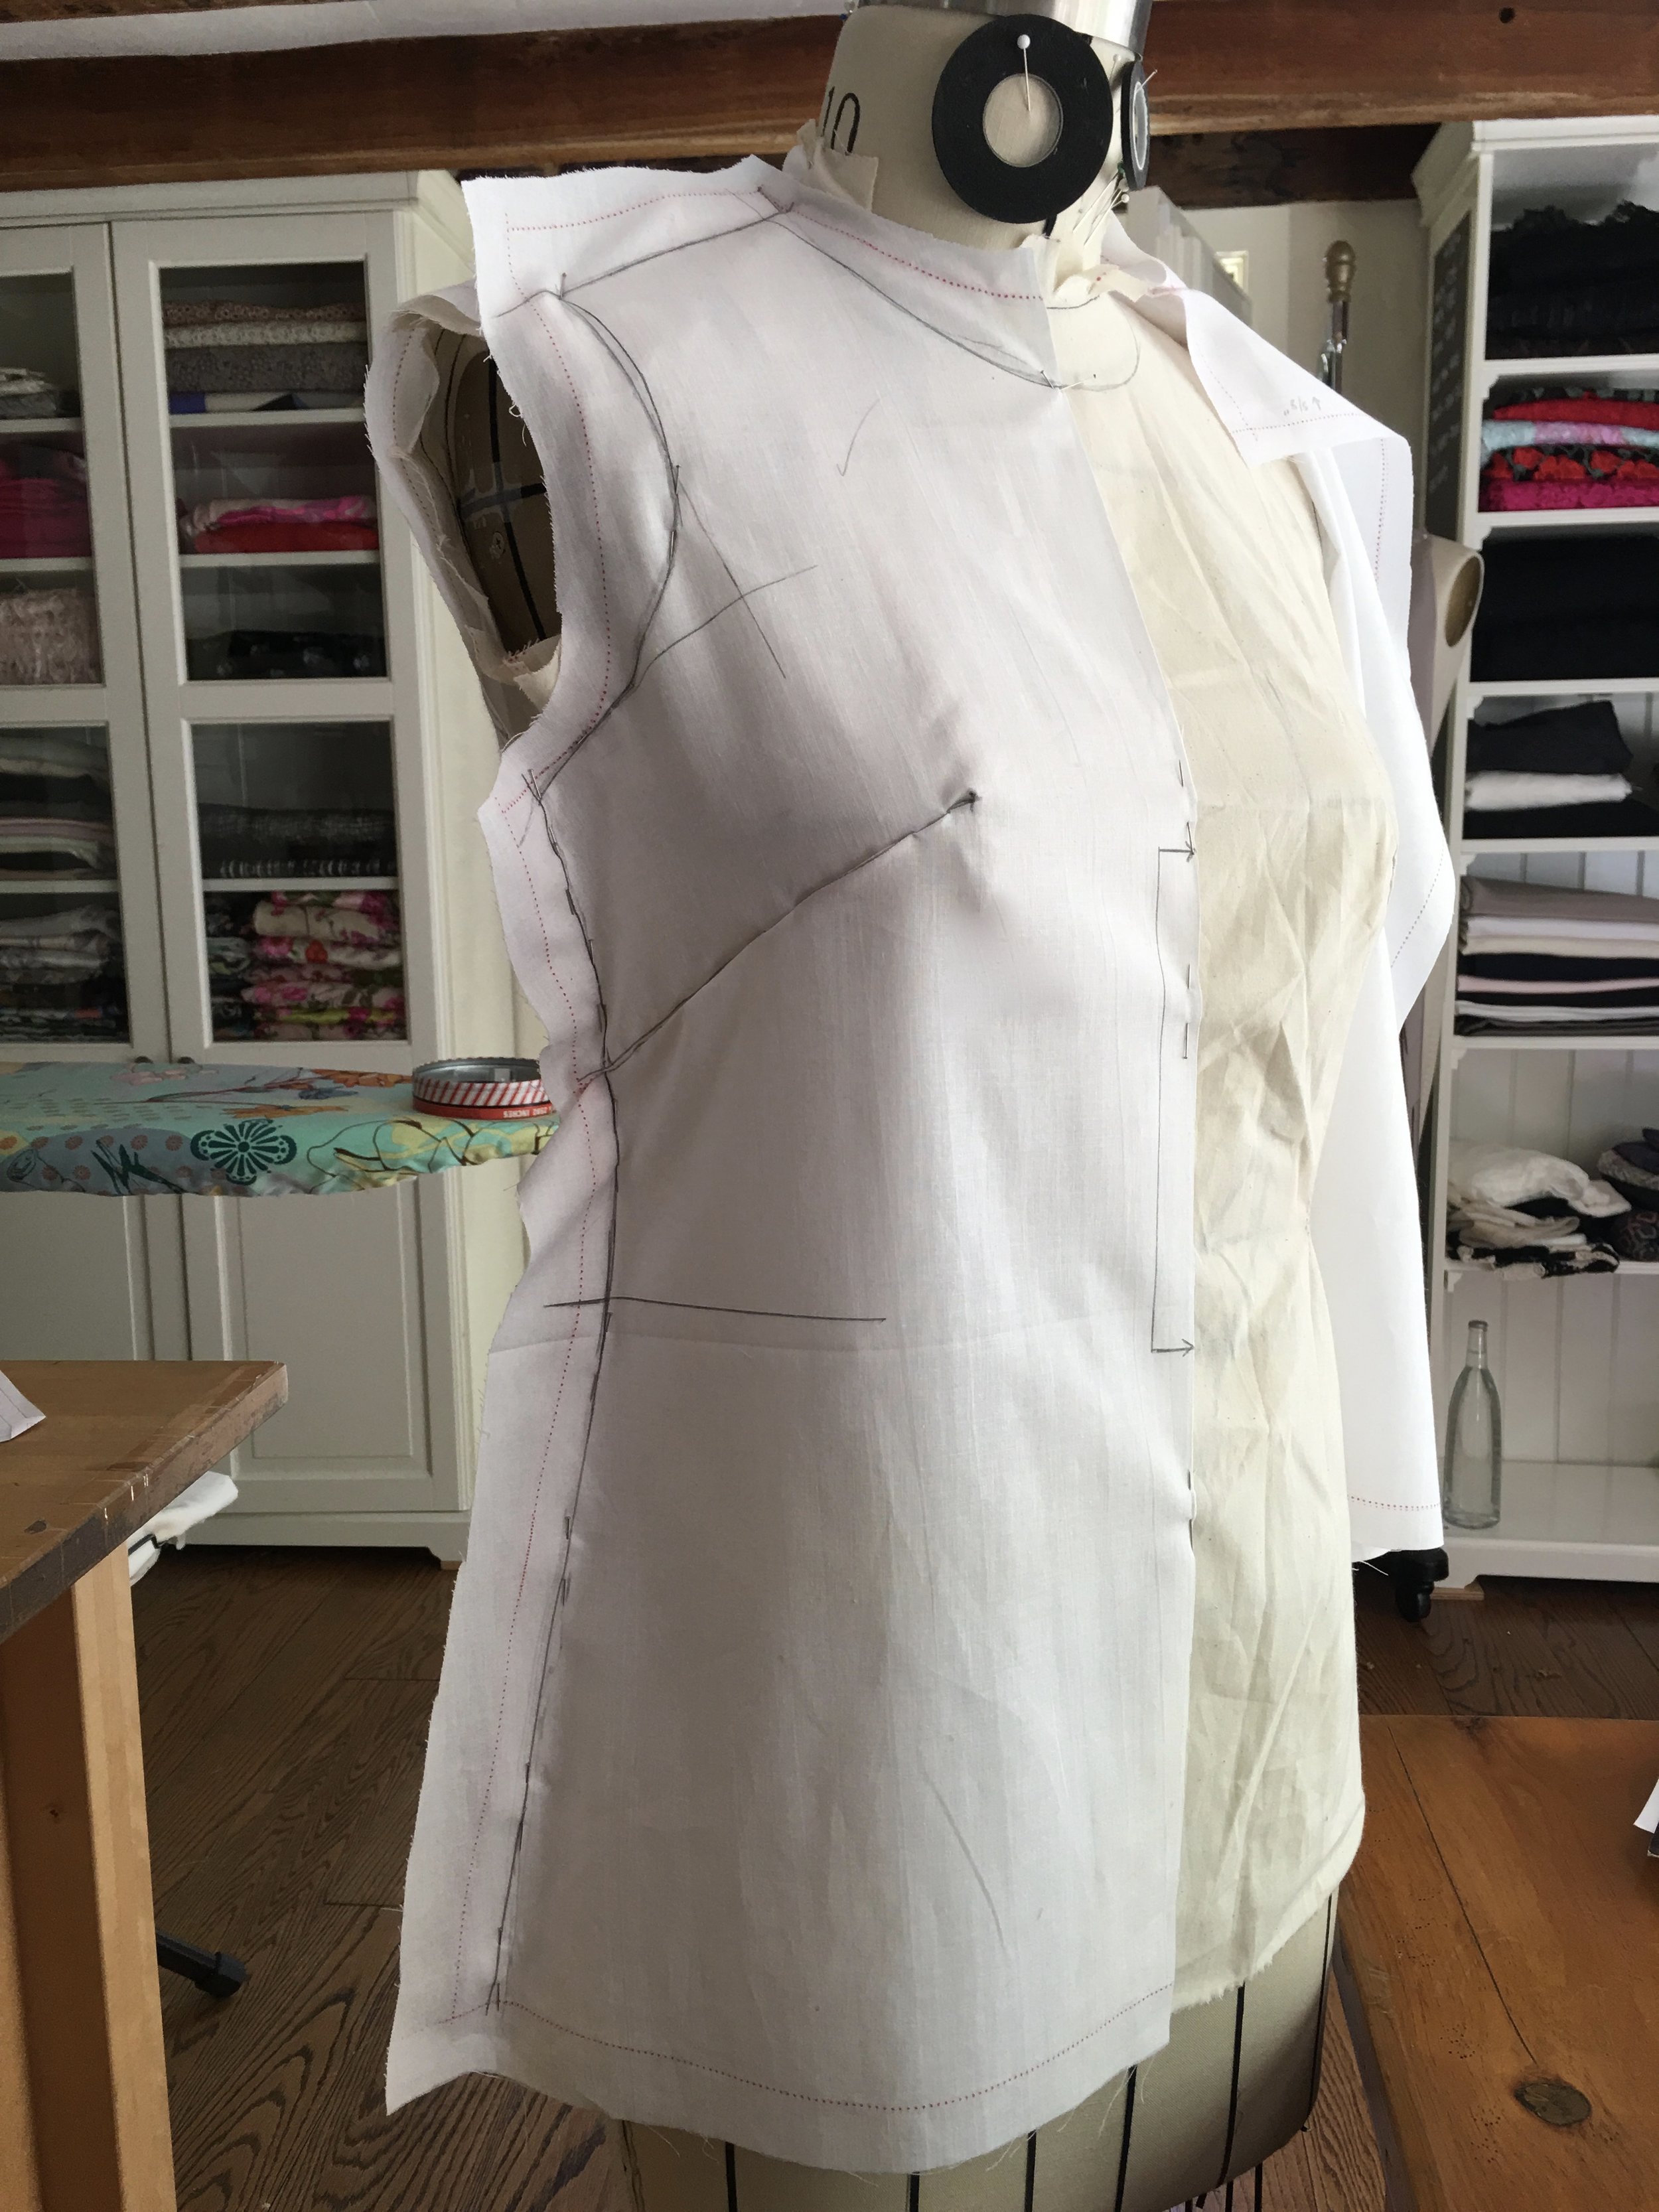 Marfy 3171 Skirt and Simple Draped Shift Top — A Challenging Sew